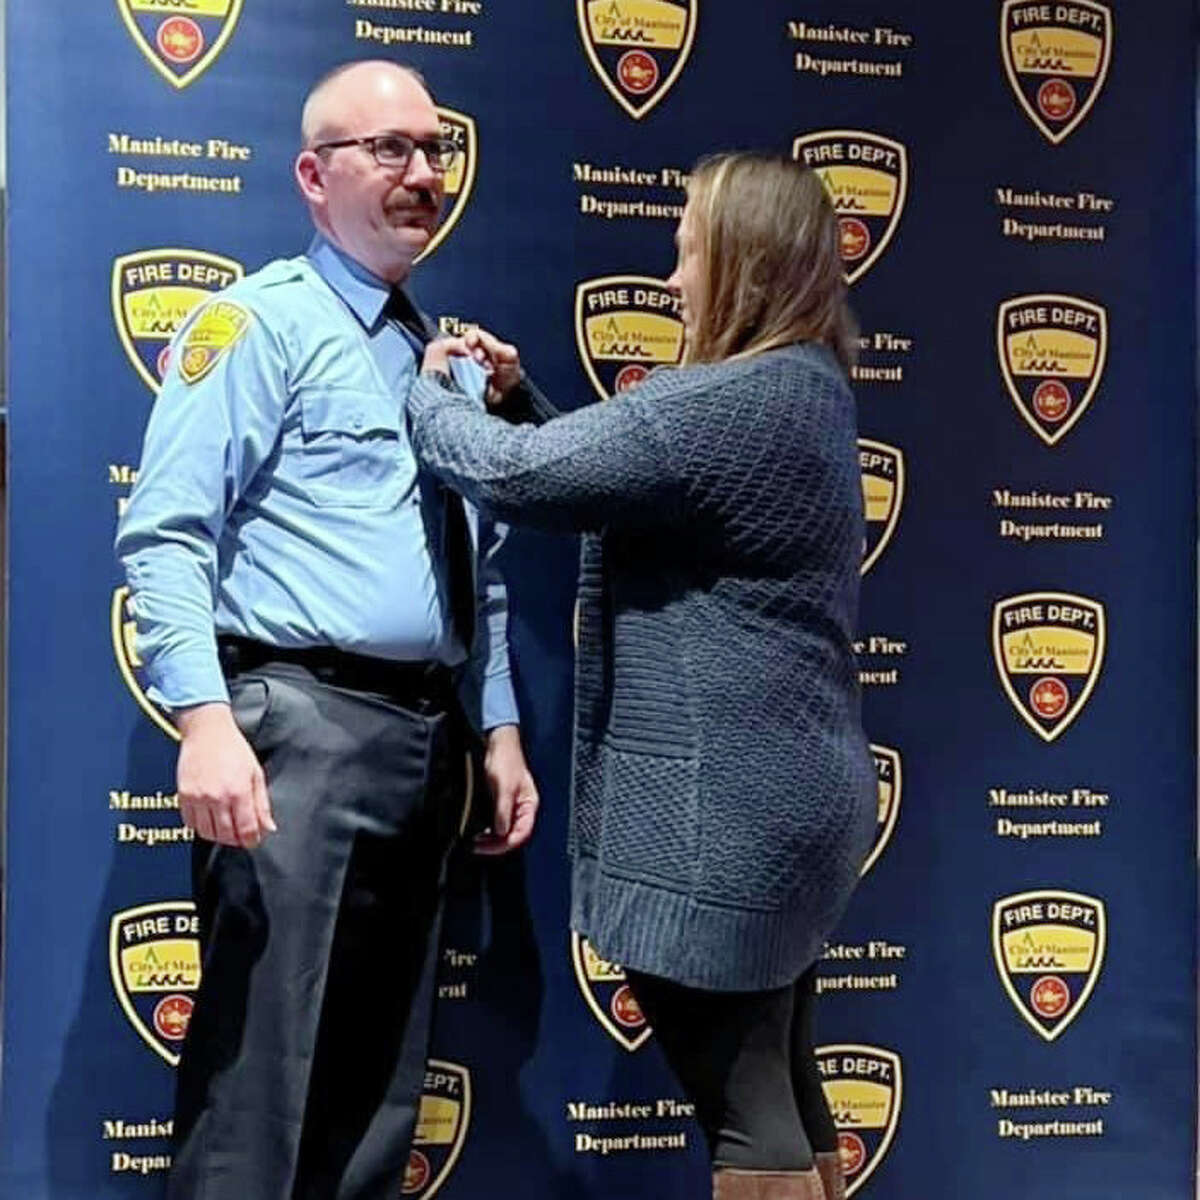 Tuesday evening, Chris Jeffries’ wife Erica Jeffries performs the pinning ceremony switching his silver badge to brass representing the change of going from firefighter-paramedic to captain. 